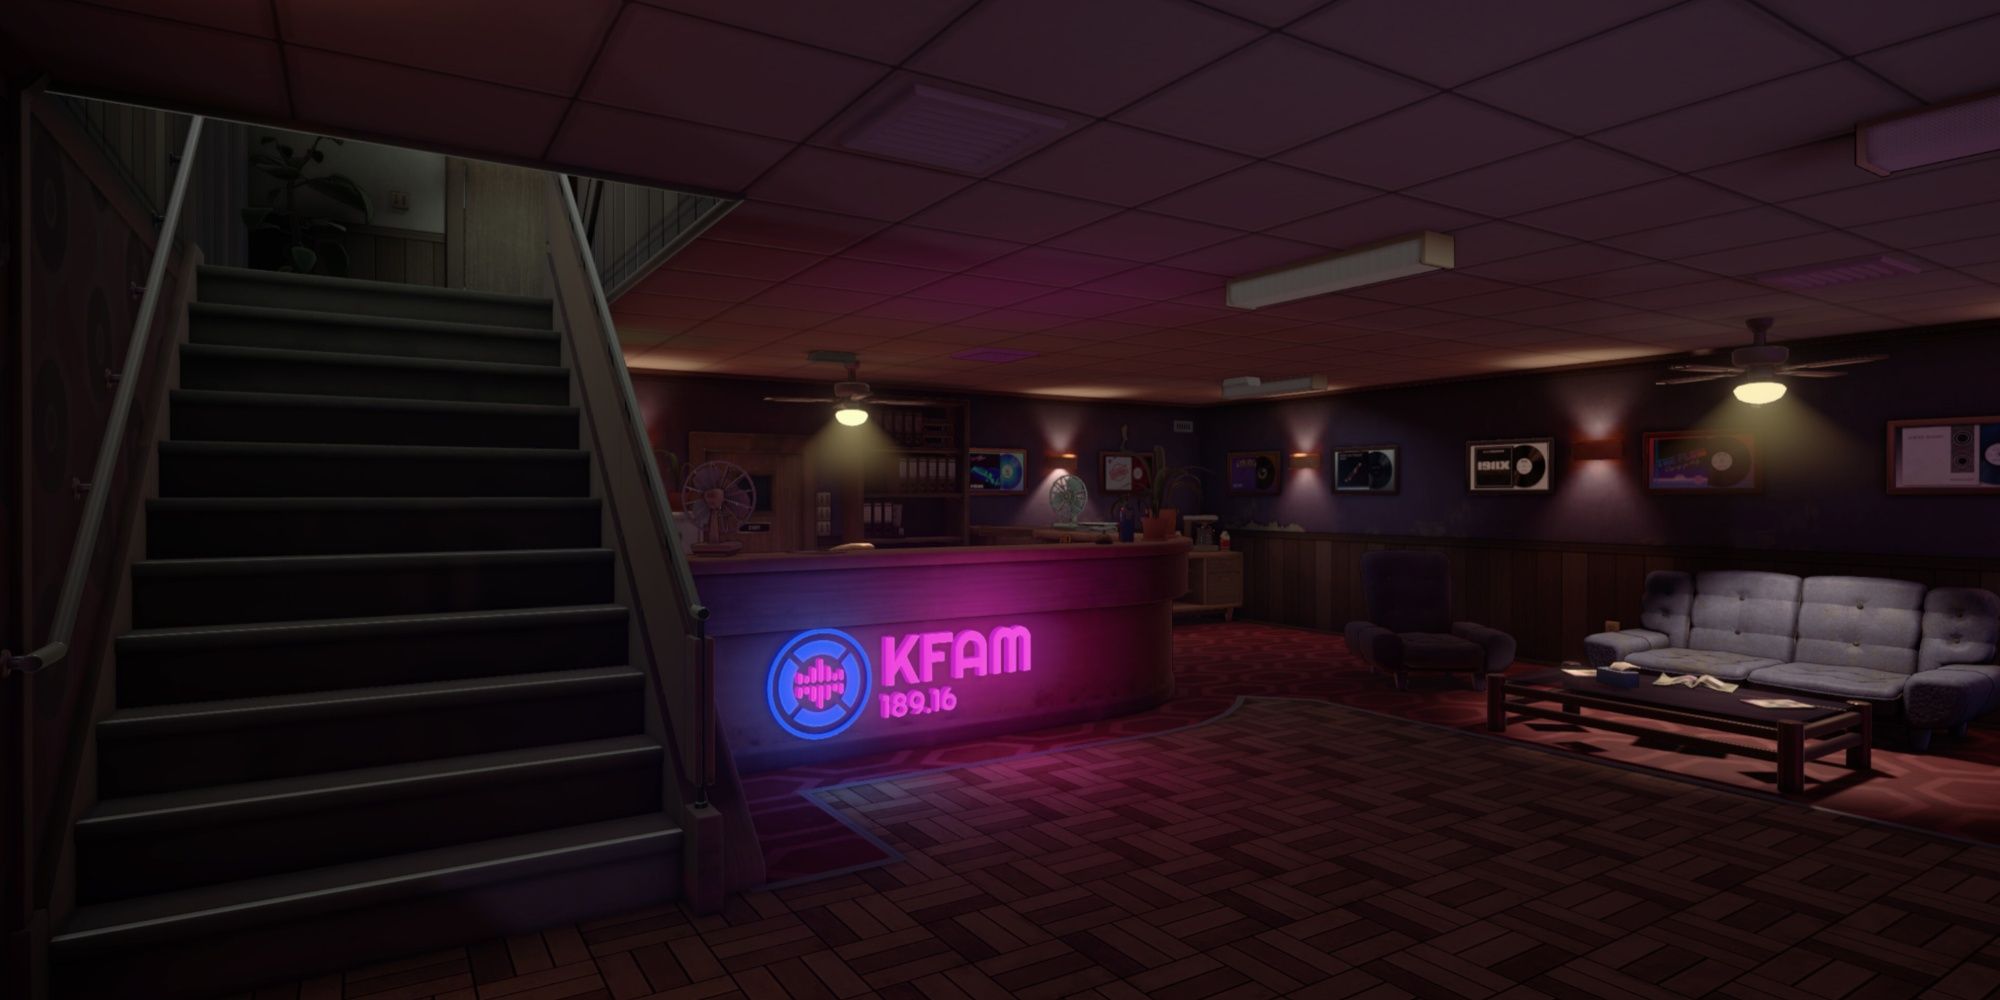 The entrance area of the main location in Killer Frequency, the lobby of the KFAM station with the title on the reception area and The Shining carpet in the distance.